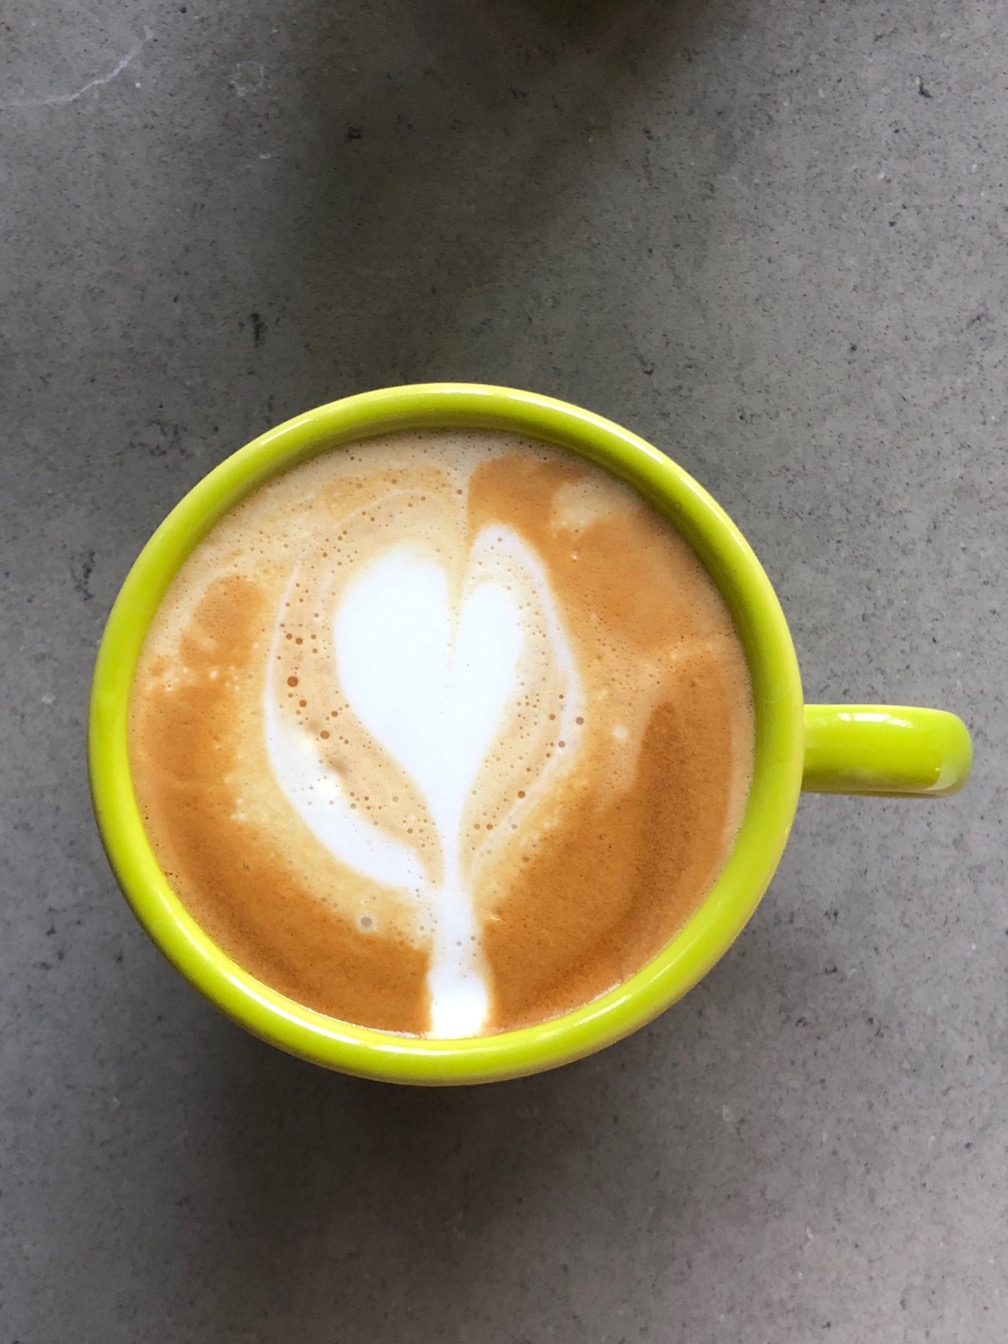 A photo of a cappuccino in a yellow cup, with a heart poured in the foam.  